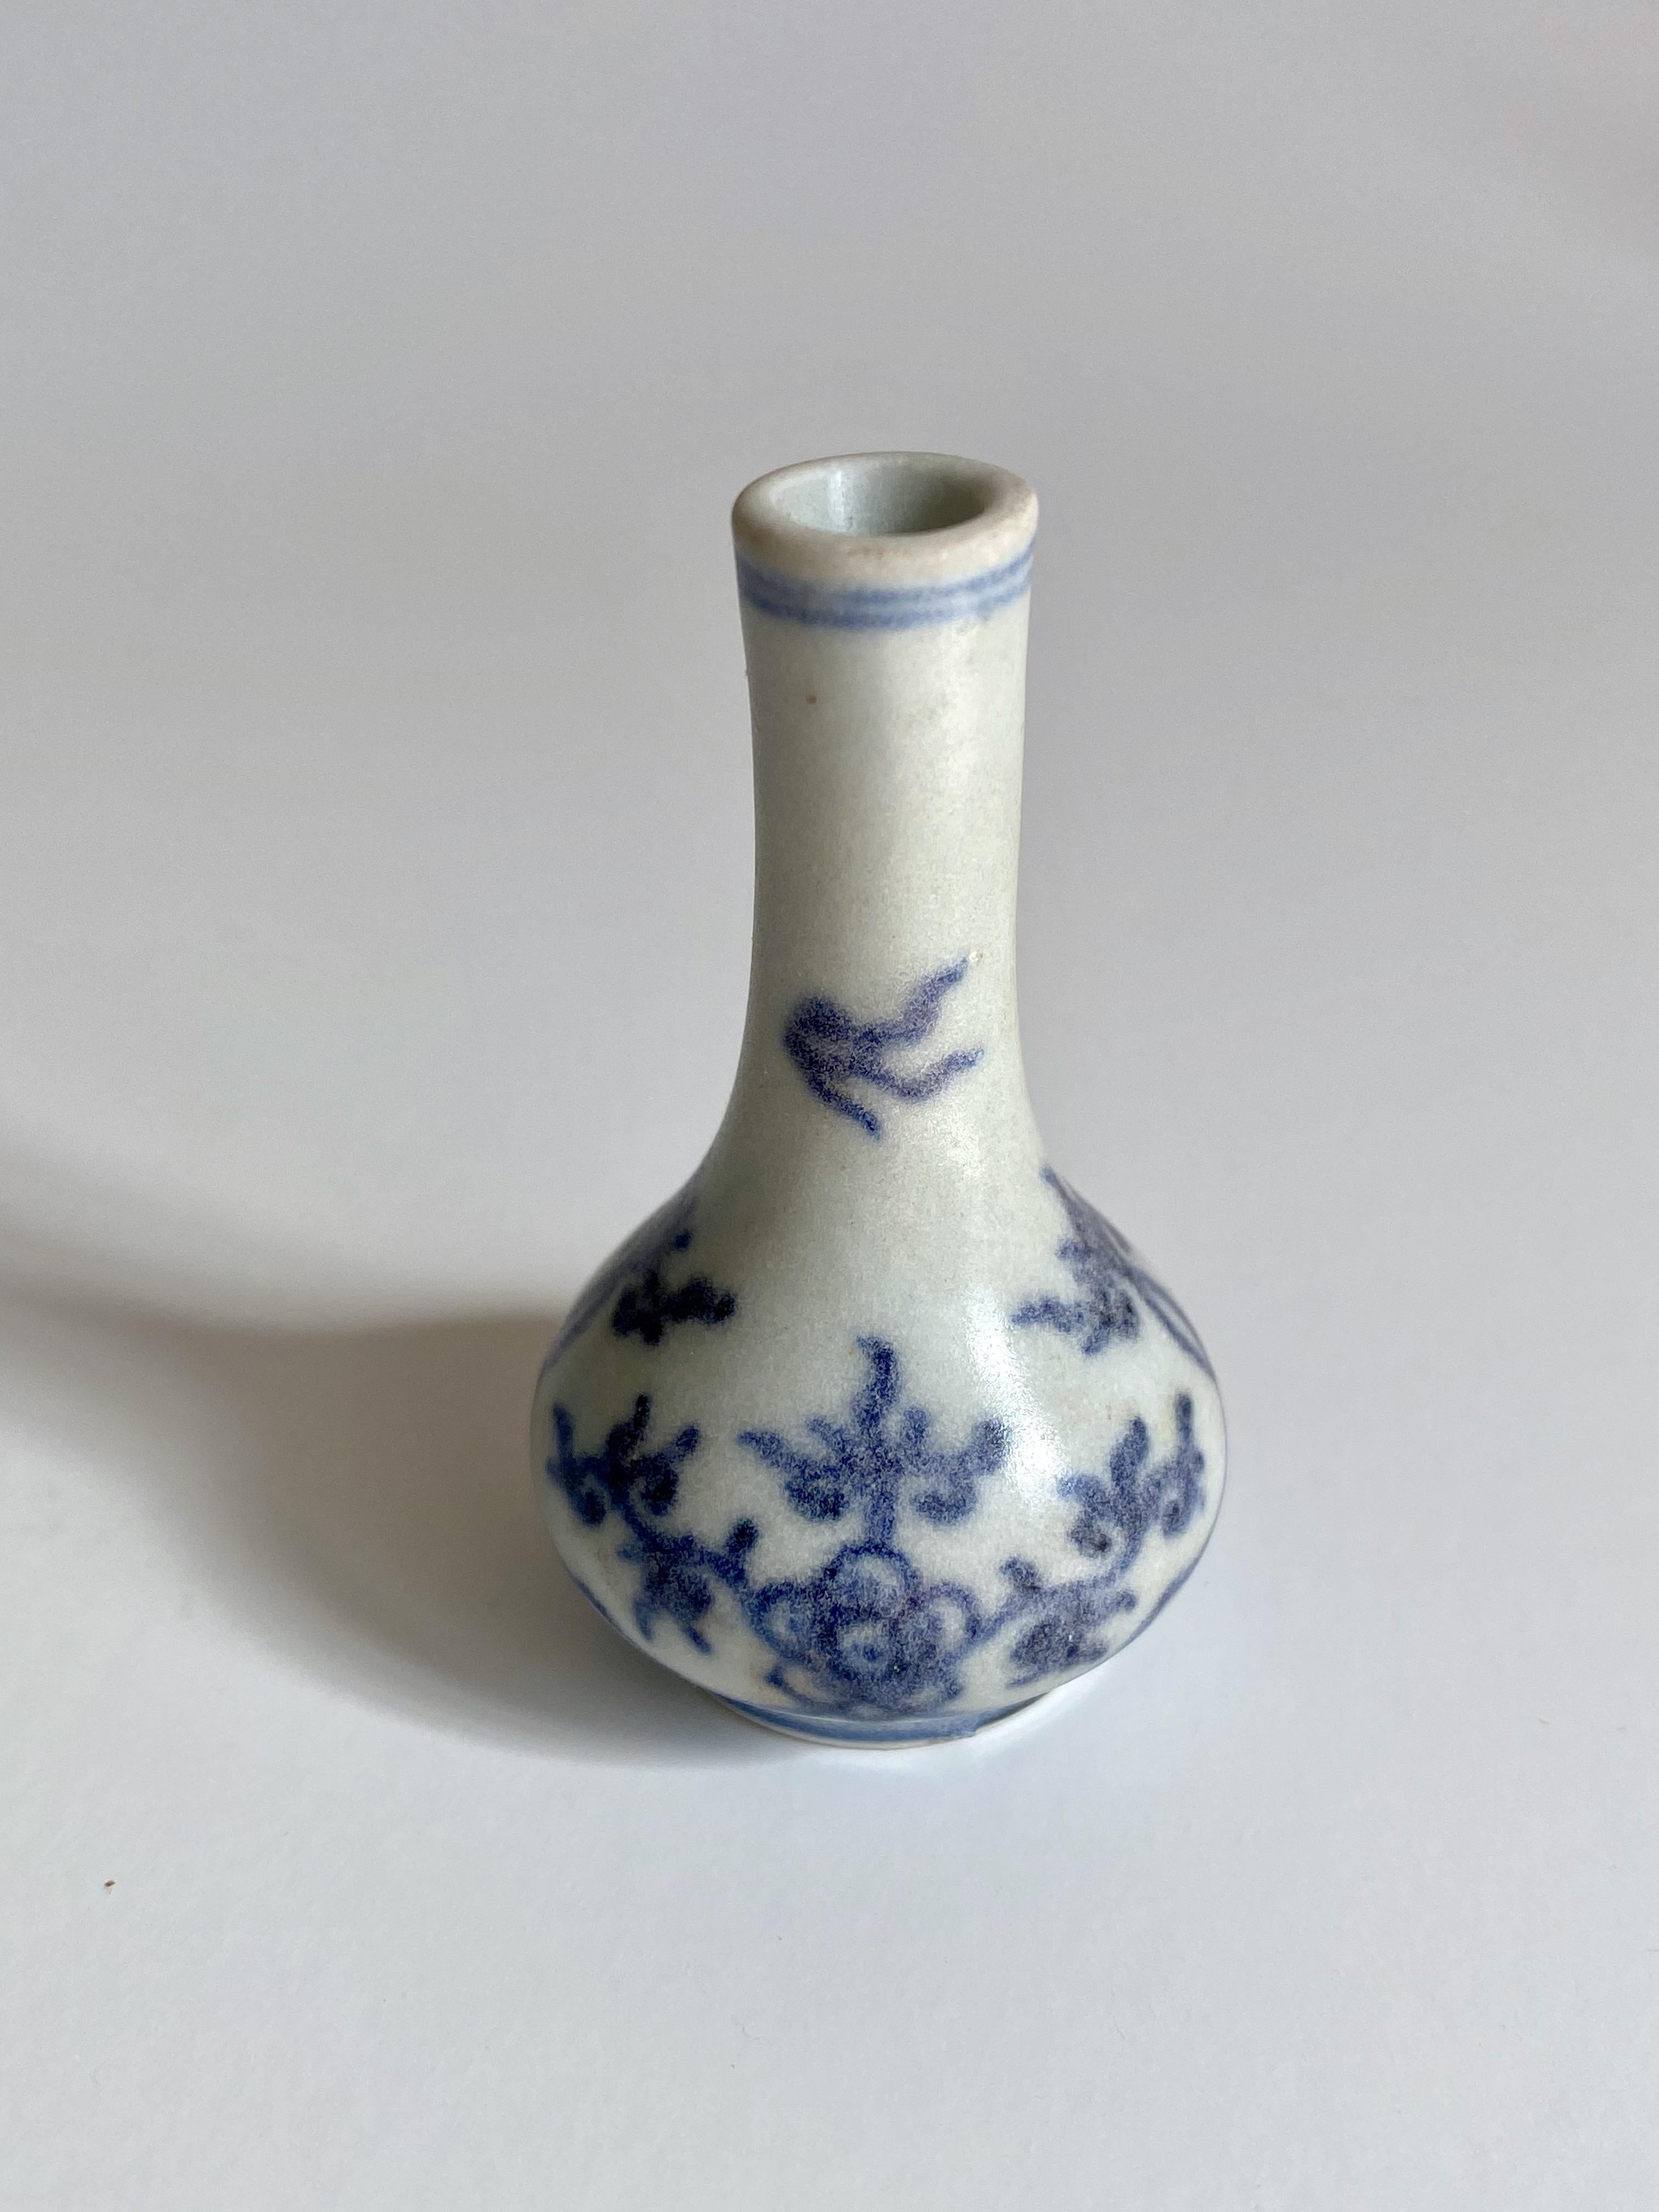 Miniature 17th century blue and white pear-shaped vase decorated with birds and flowers.
 
This miniature vase was part of a hoard recovered by Captain Michael Hatcher from the wreck of a ship that sunk in the South China sea in approximately